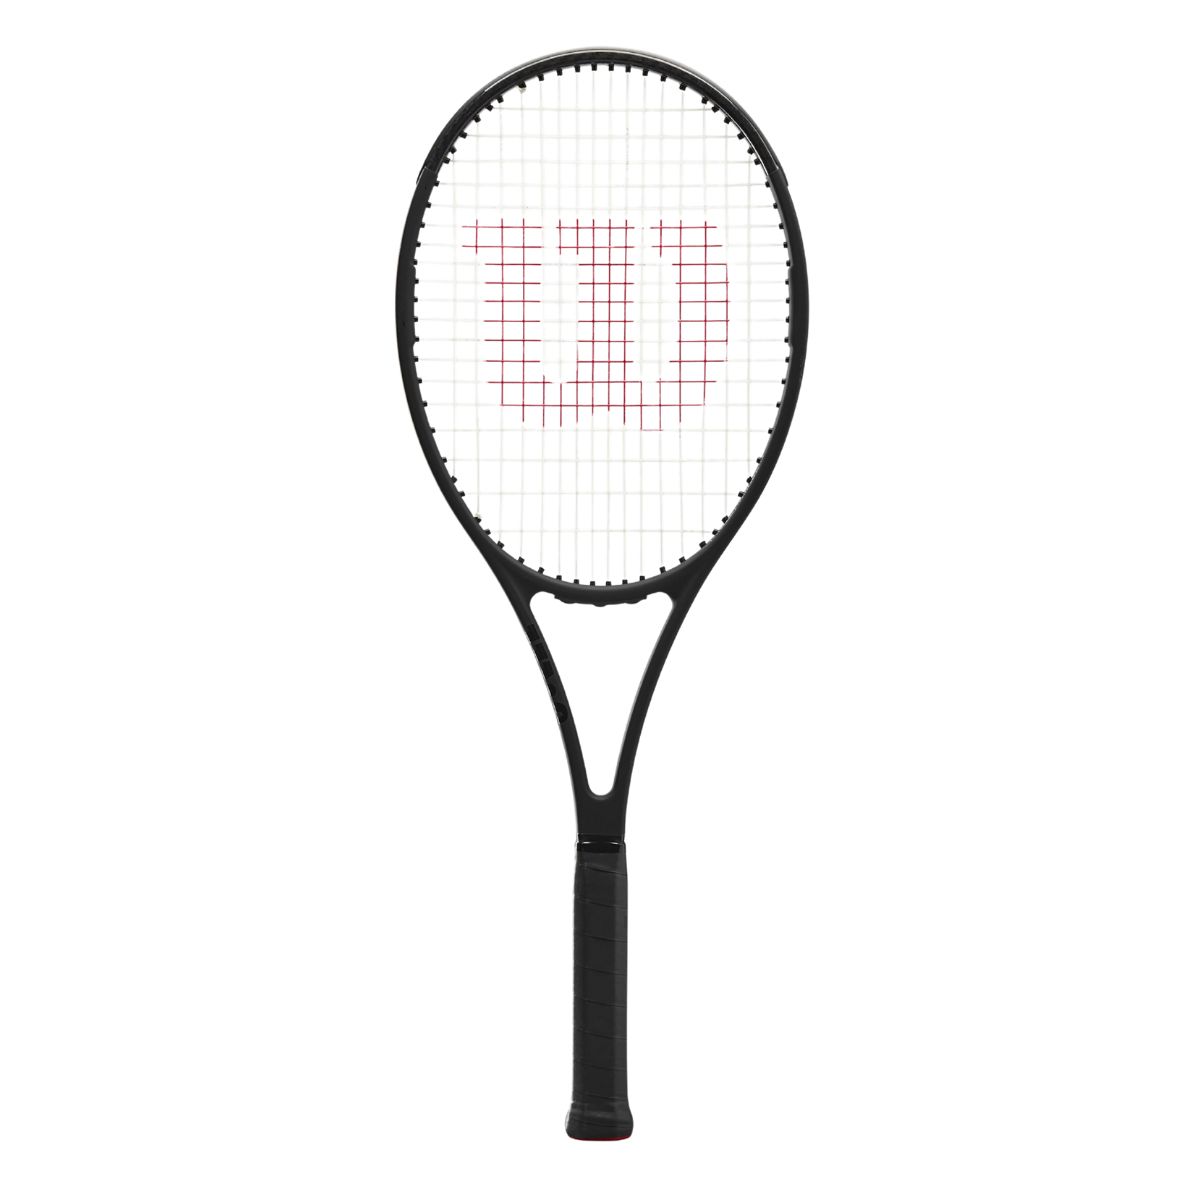 The Best Tennis Rackets for Advanced Players Options: Wilson Pro Staff 97 v13